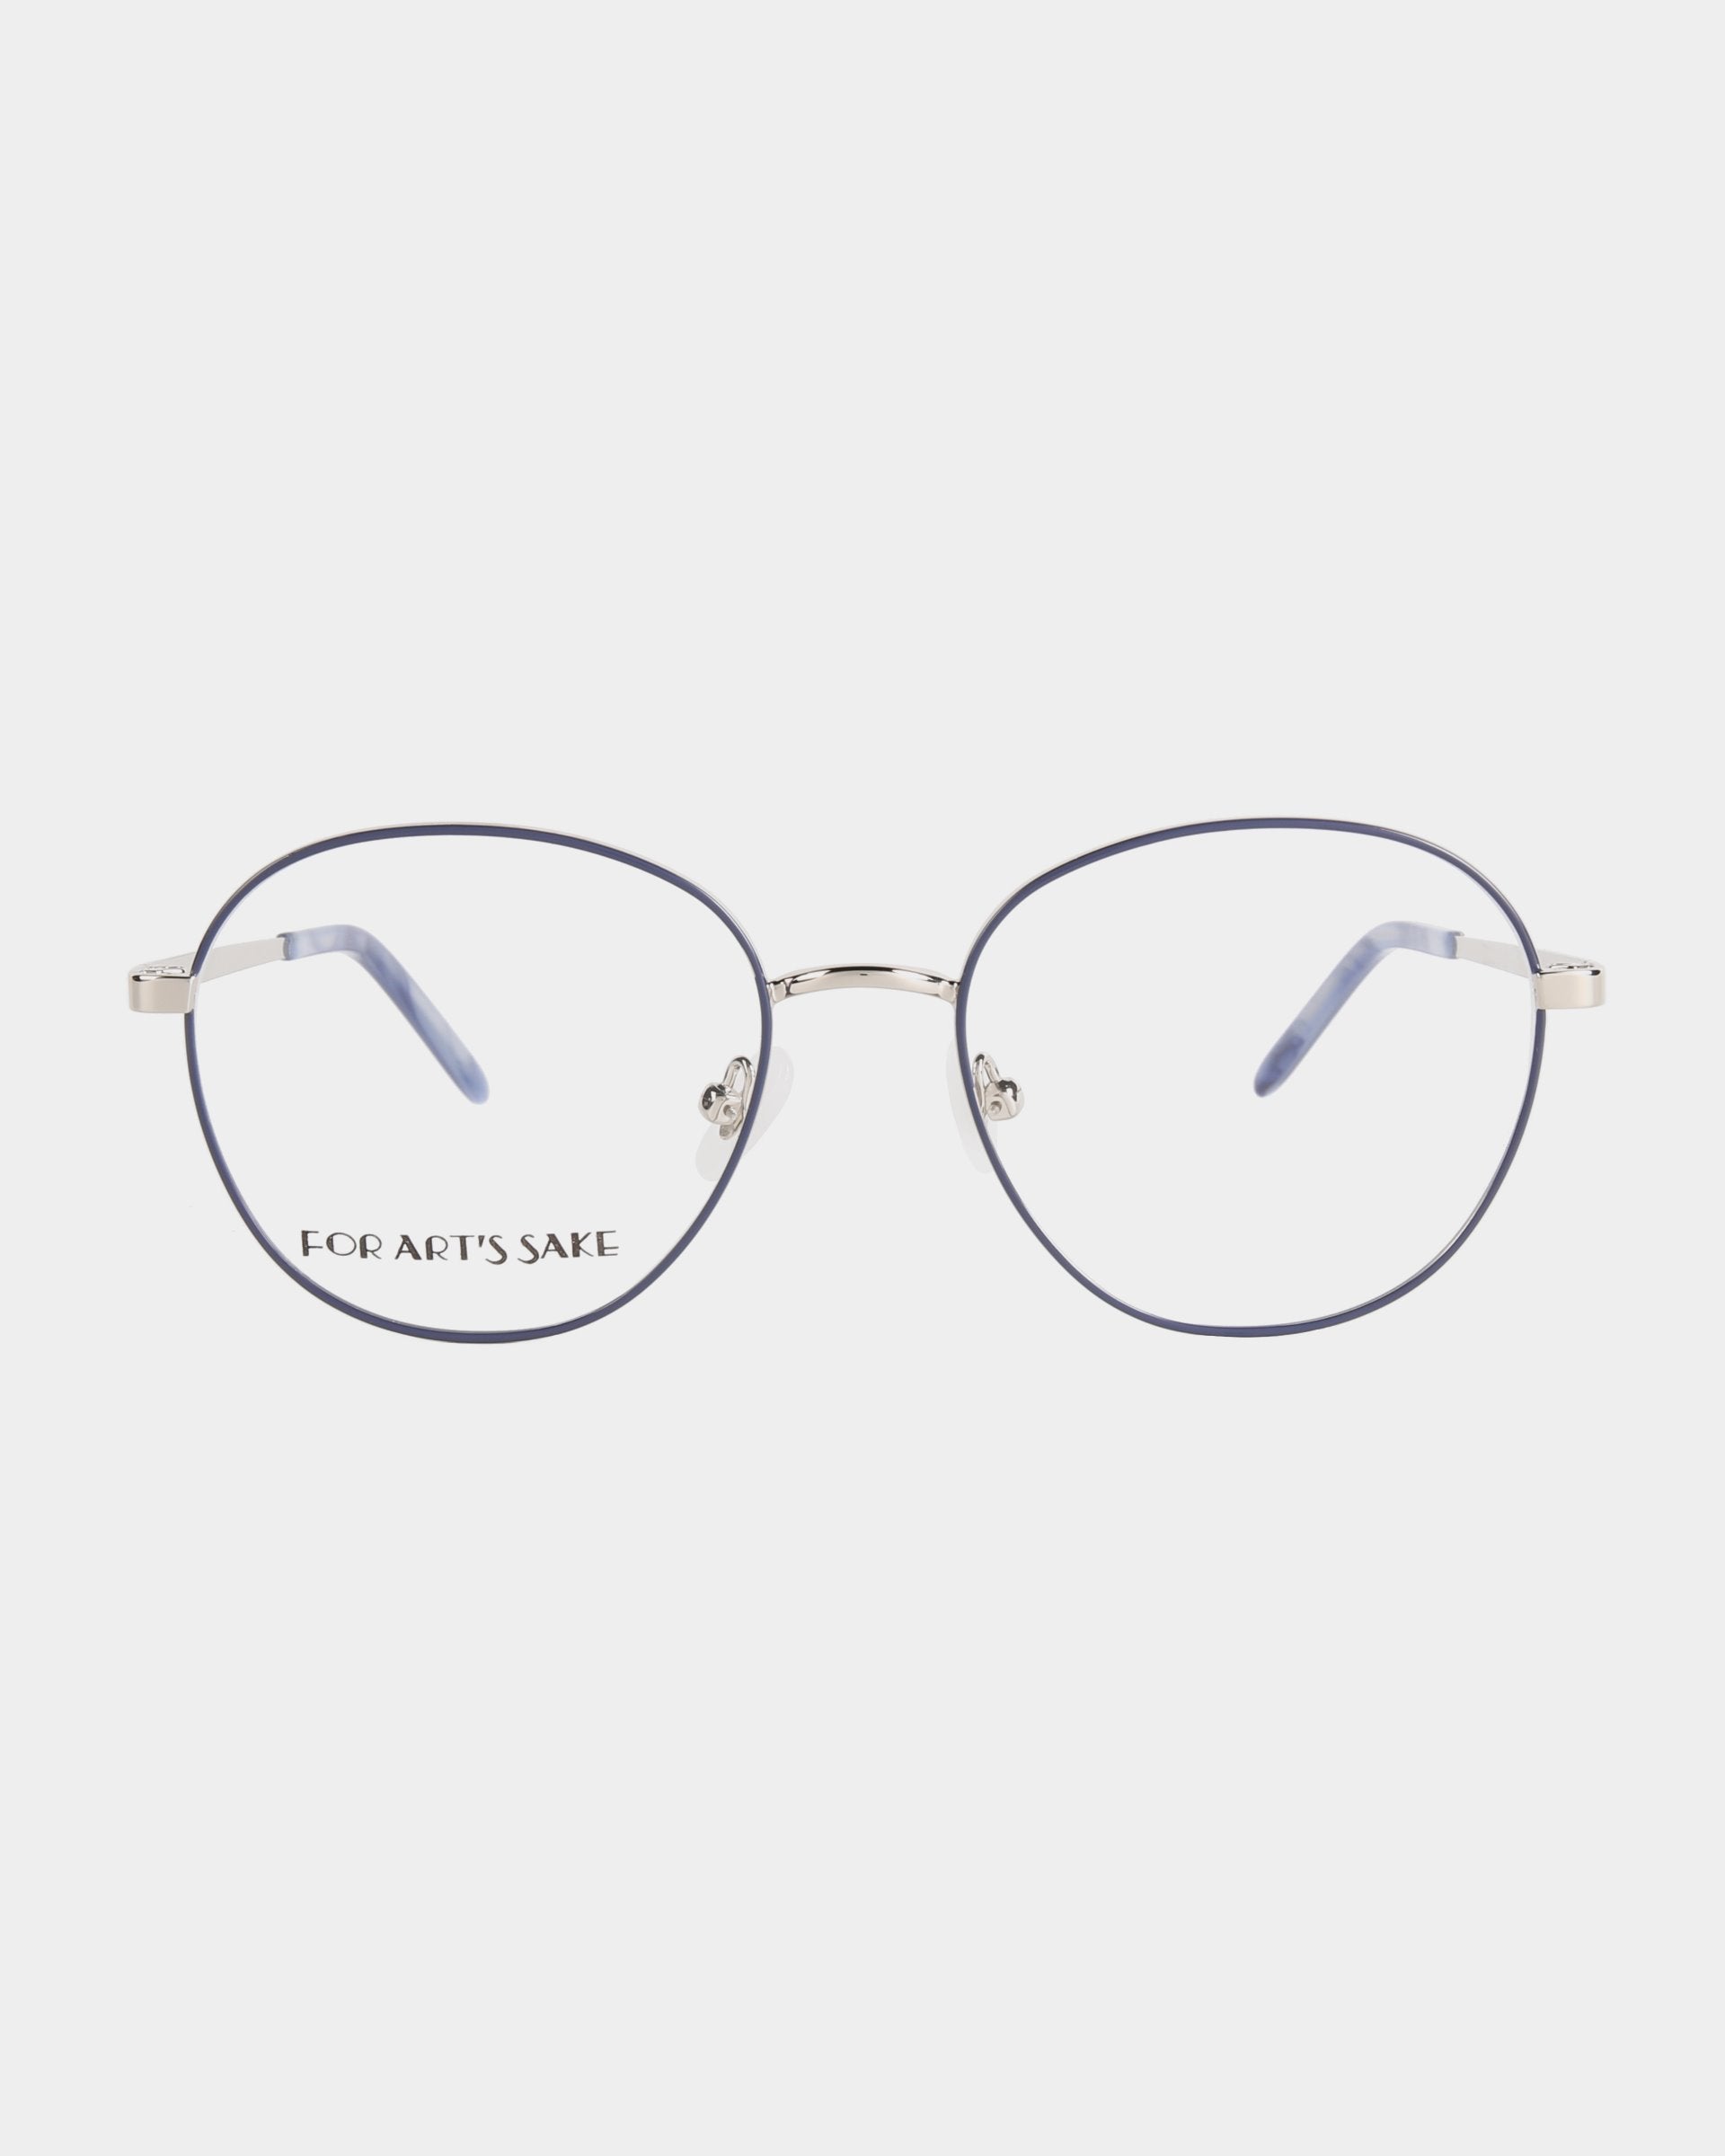 A pair of stylish eyeglasses with thin, silver metal frames and large round lenses. The temples are accented with a touch of blue on the tips. The left lens has &quot;FOR ART&#39;S SAKE&quot; written in small, black font. Featuring adjustable nose pads and a blue light filter, the background is plain white. Product Name: Hailey Brand Name: For Art&#39;s Sake®